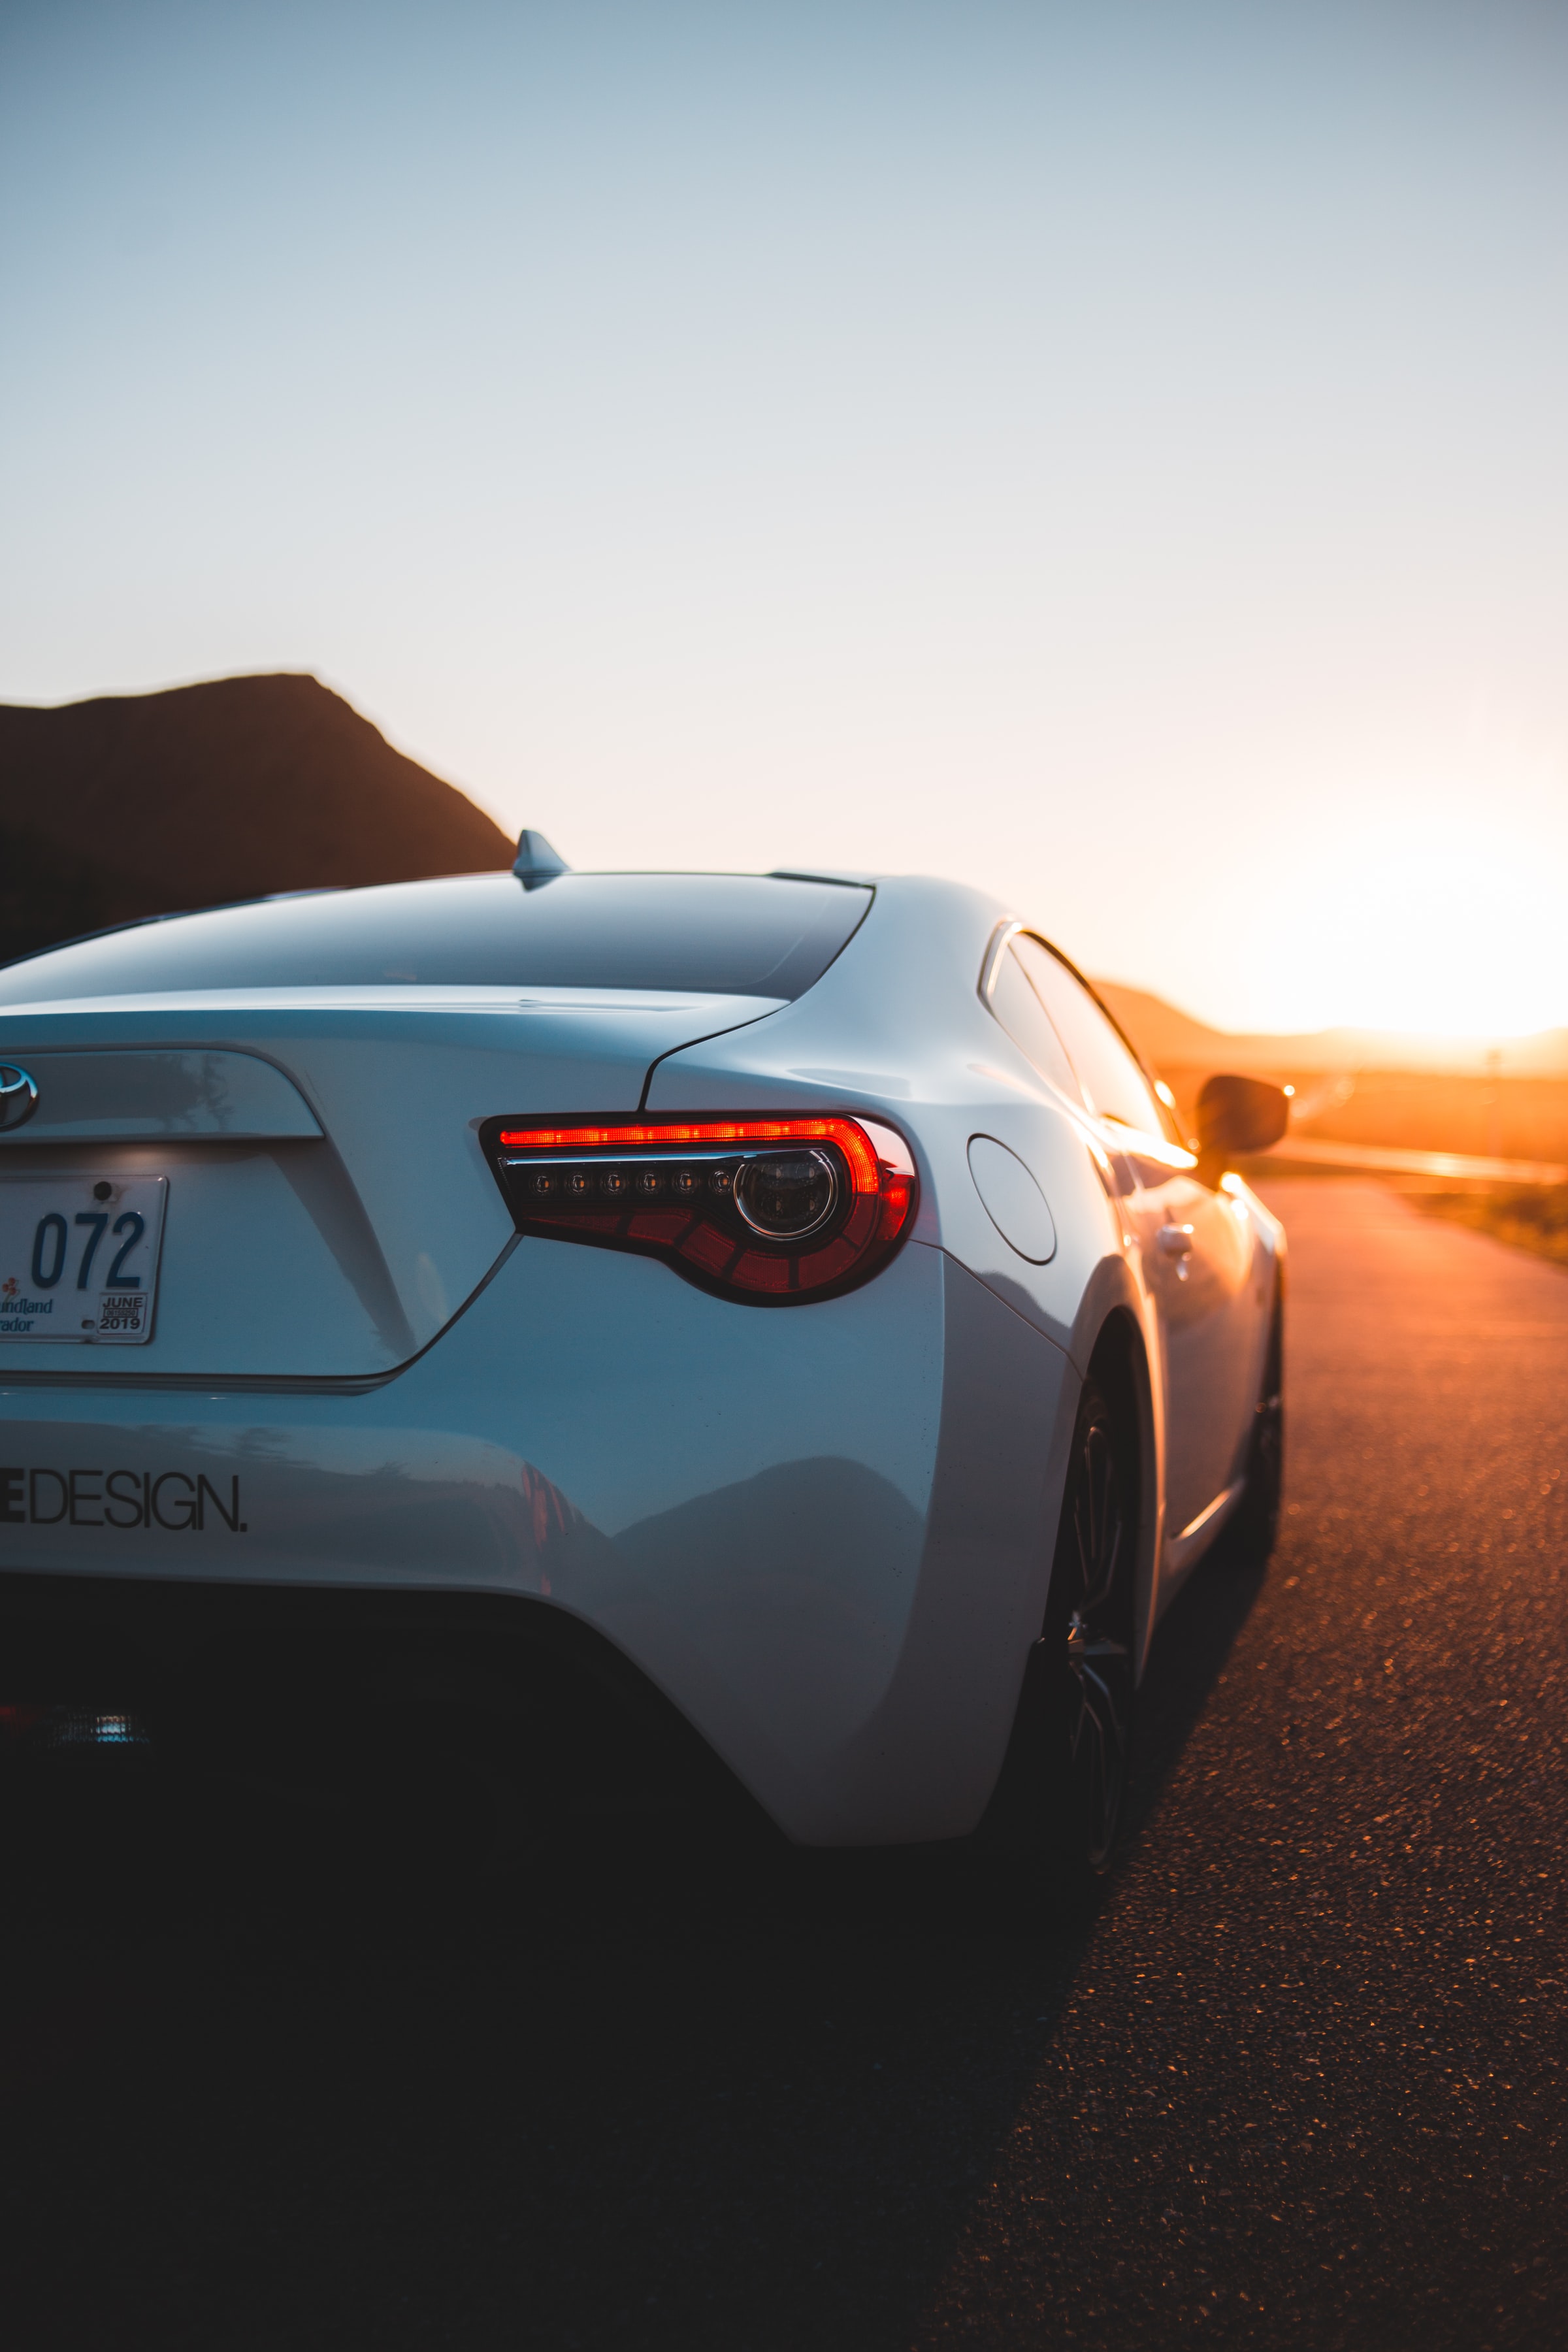 Full HD Wallpaper cars, rear view, sports, sunset, toyota, white, car, sports car, back view